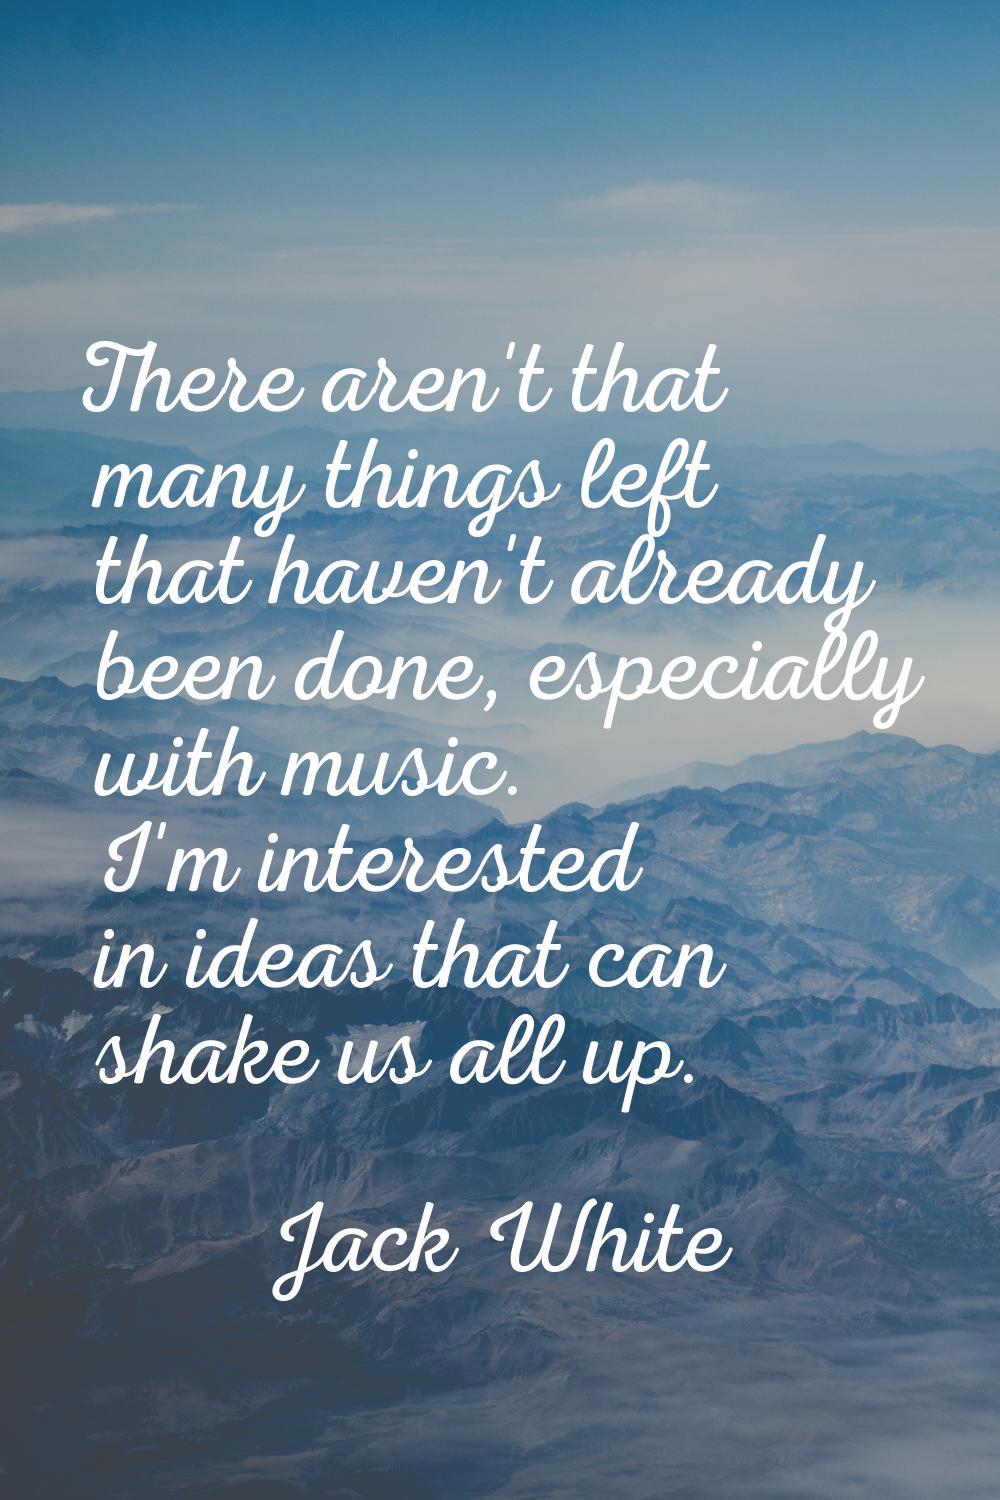 There aren't that many things left that haven't already been done, especially with music. I'm inter